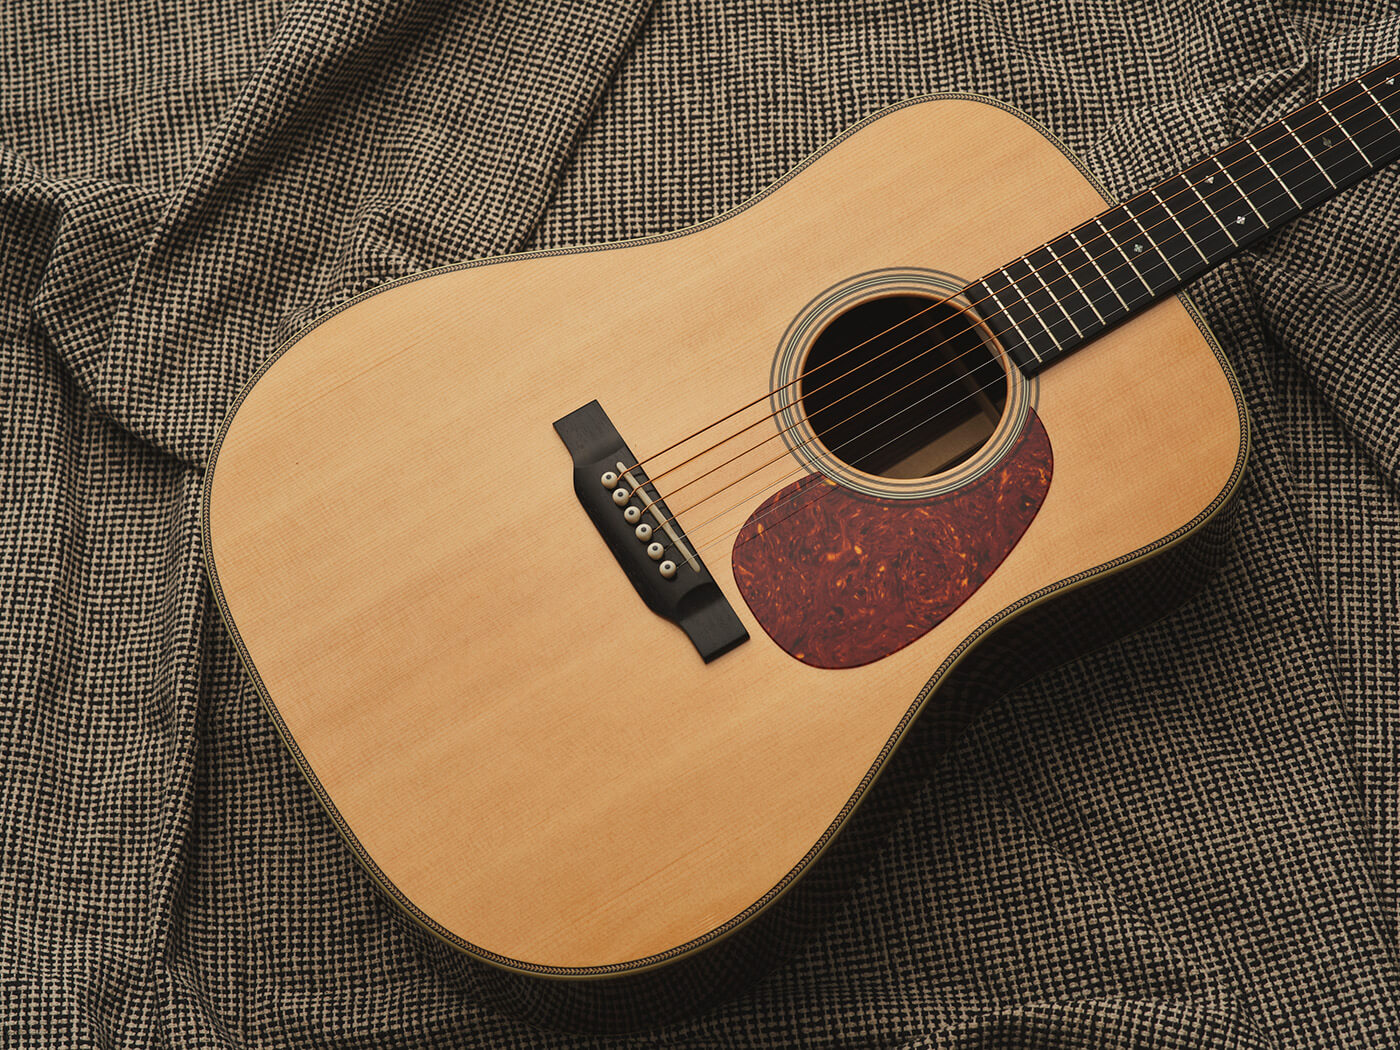 Bourgeois Touchstone Vintage Dreadnought by Adam Gasson